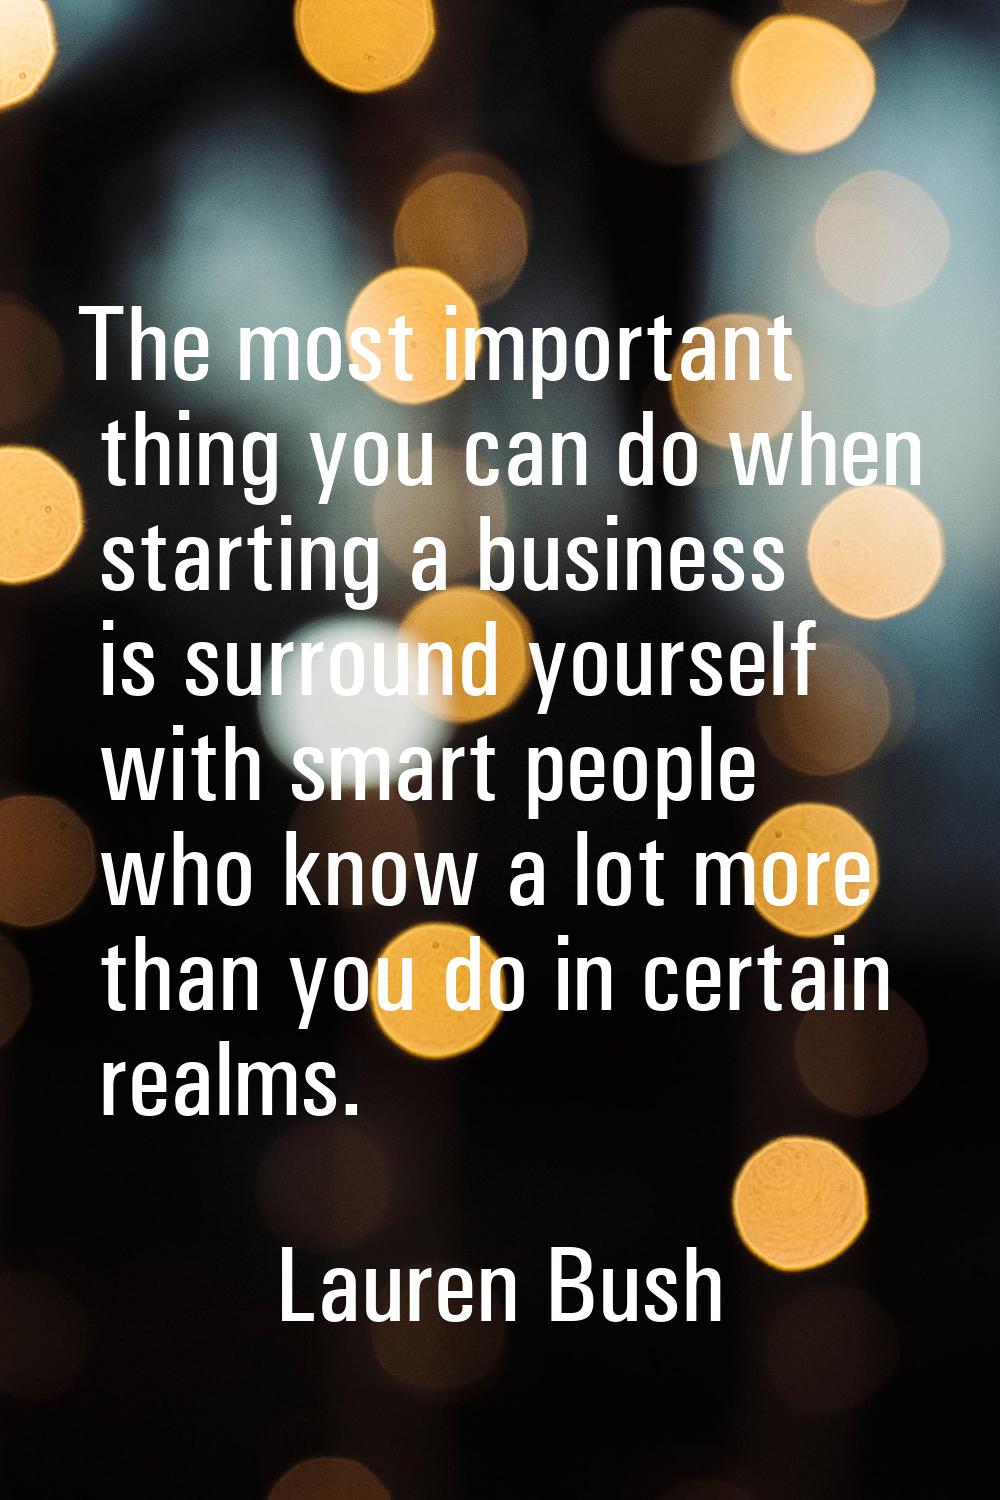 The most important thing you can do when starting a business is surround yourself with smart people